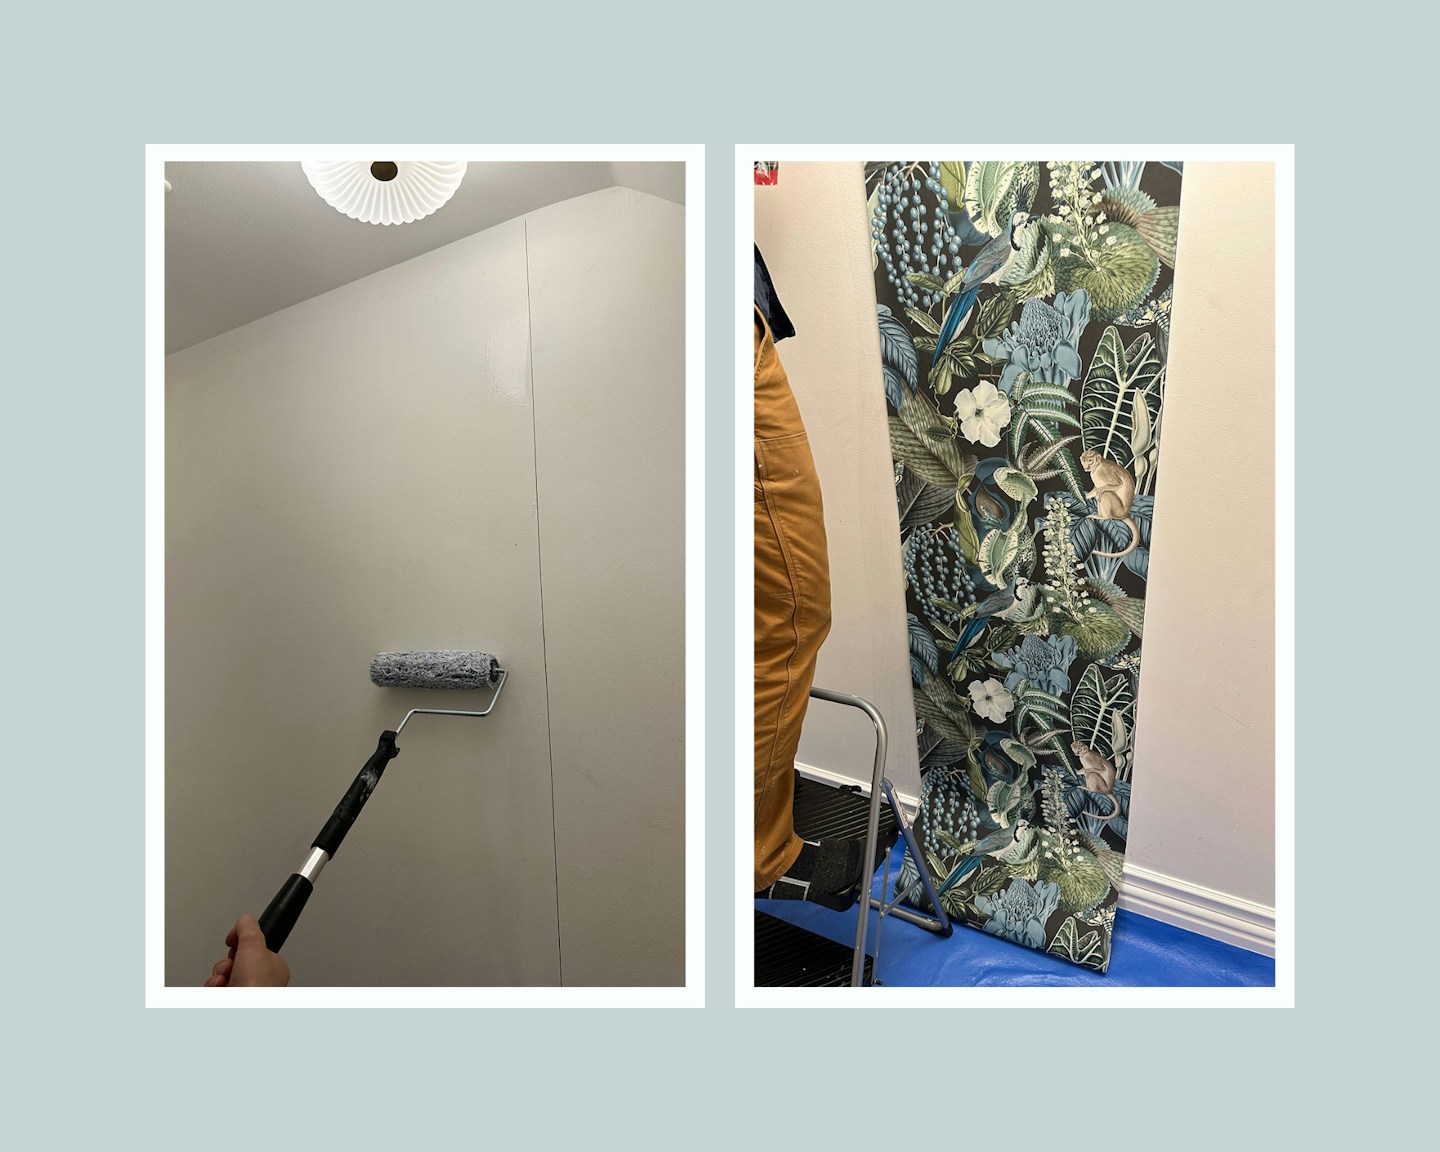 How to install wallpaper in a small powder room bathroom. I share tips on how to get started and the ideal sequence for getting a professional install!